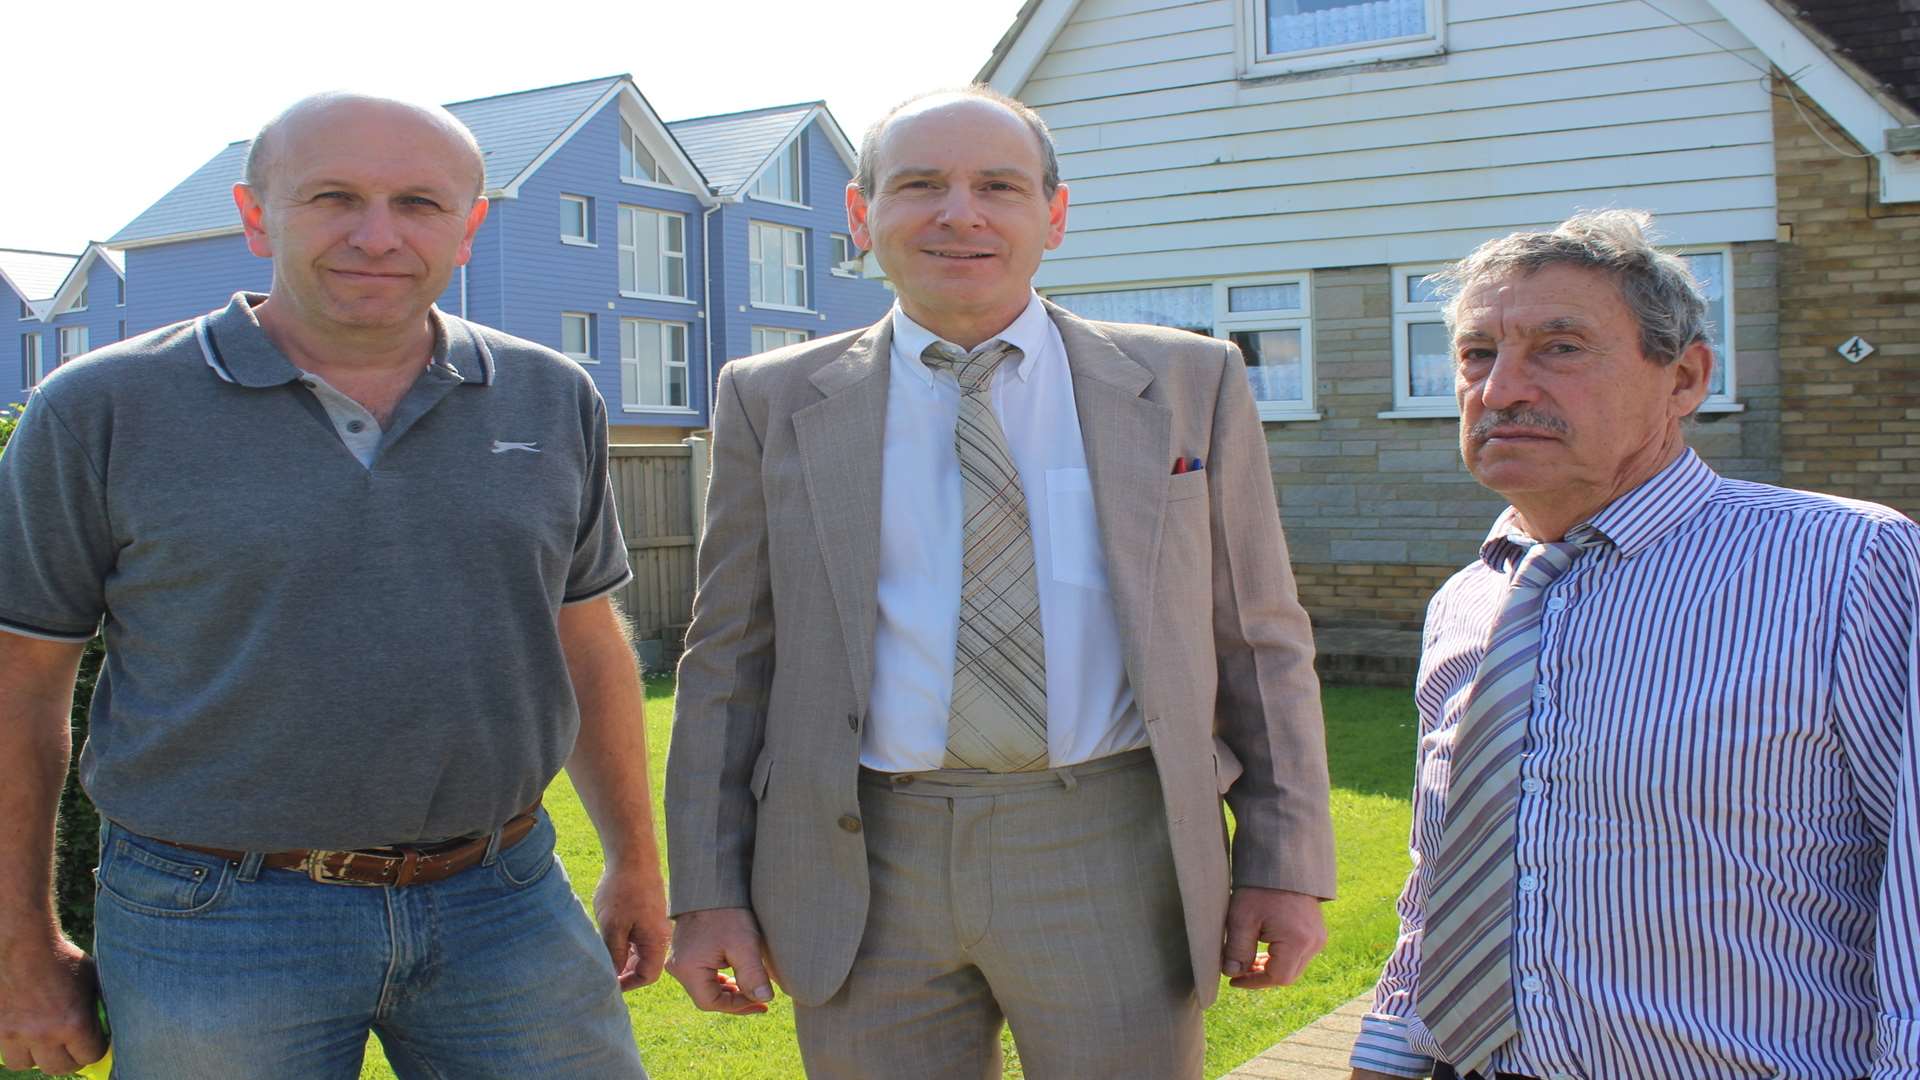 Residents, from the left, Wayne Henderson, Geoff Smith and Tim Bell